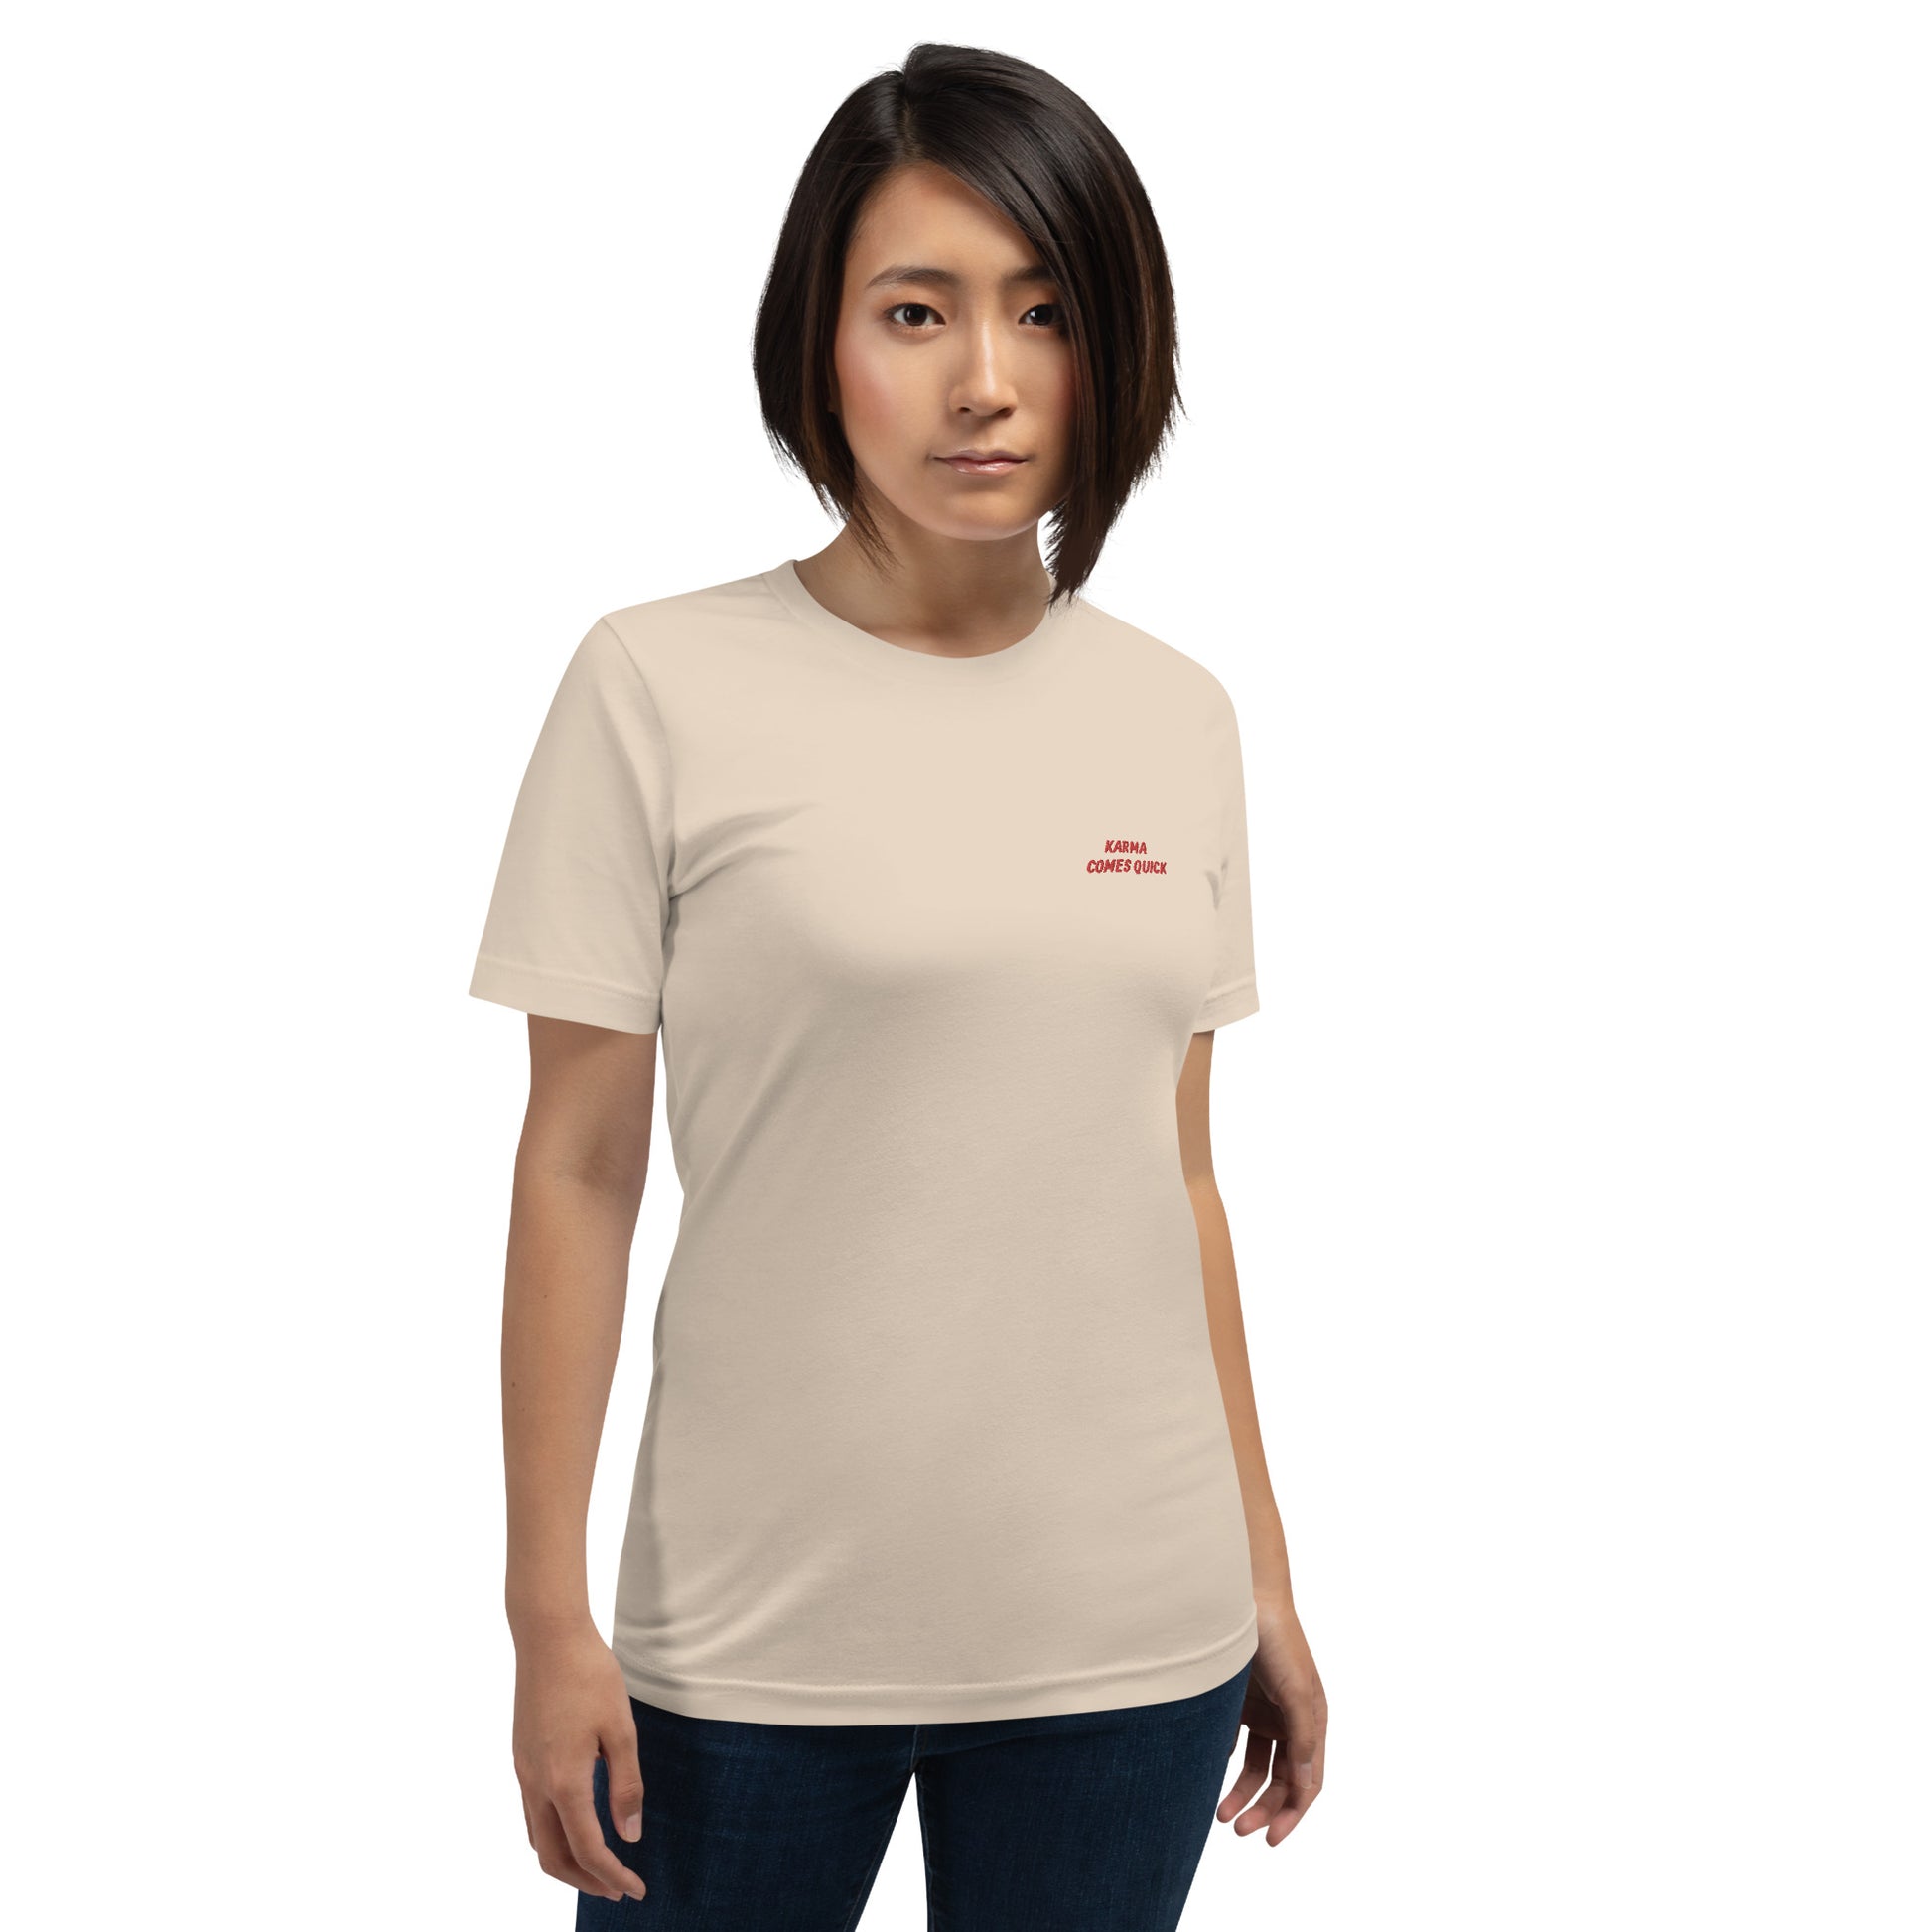 Woman wearing NOMADA Karma Comes Quick embroidered t-shirt, Soft cream color shirt